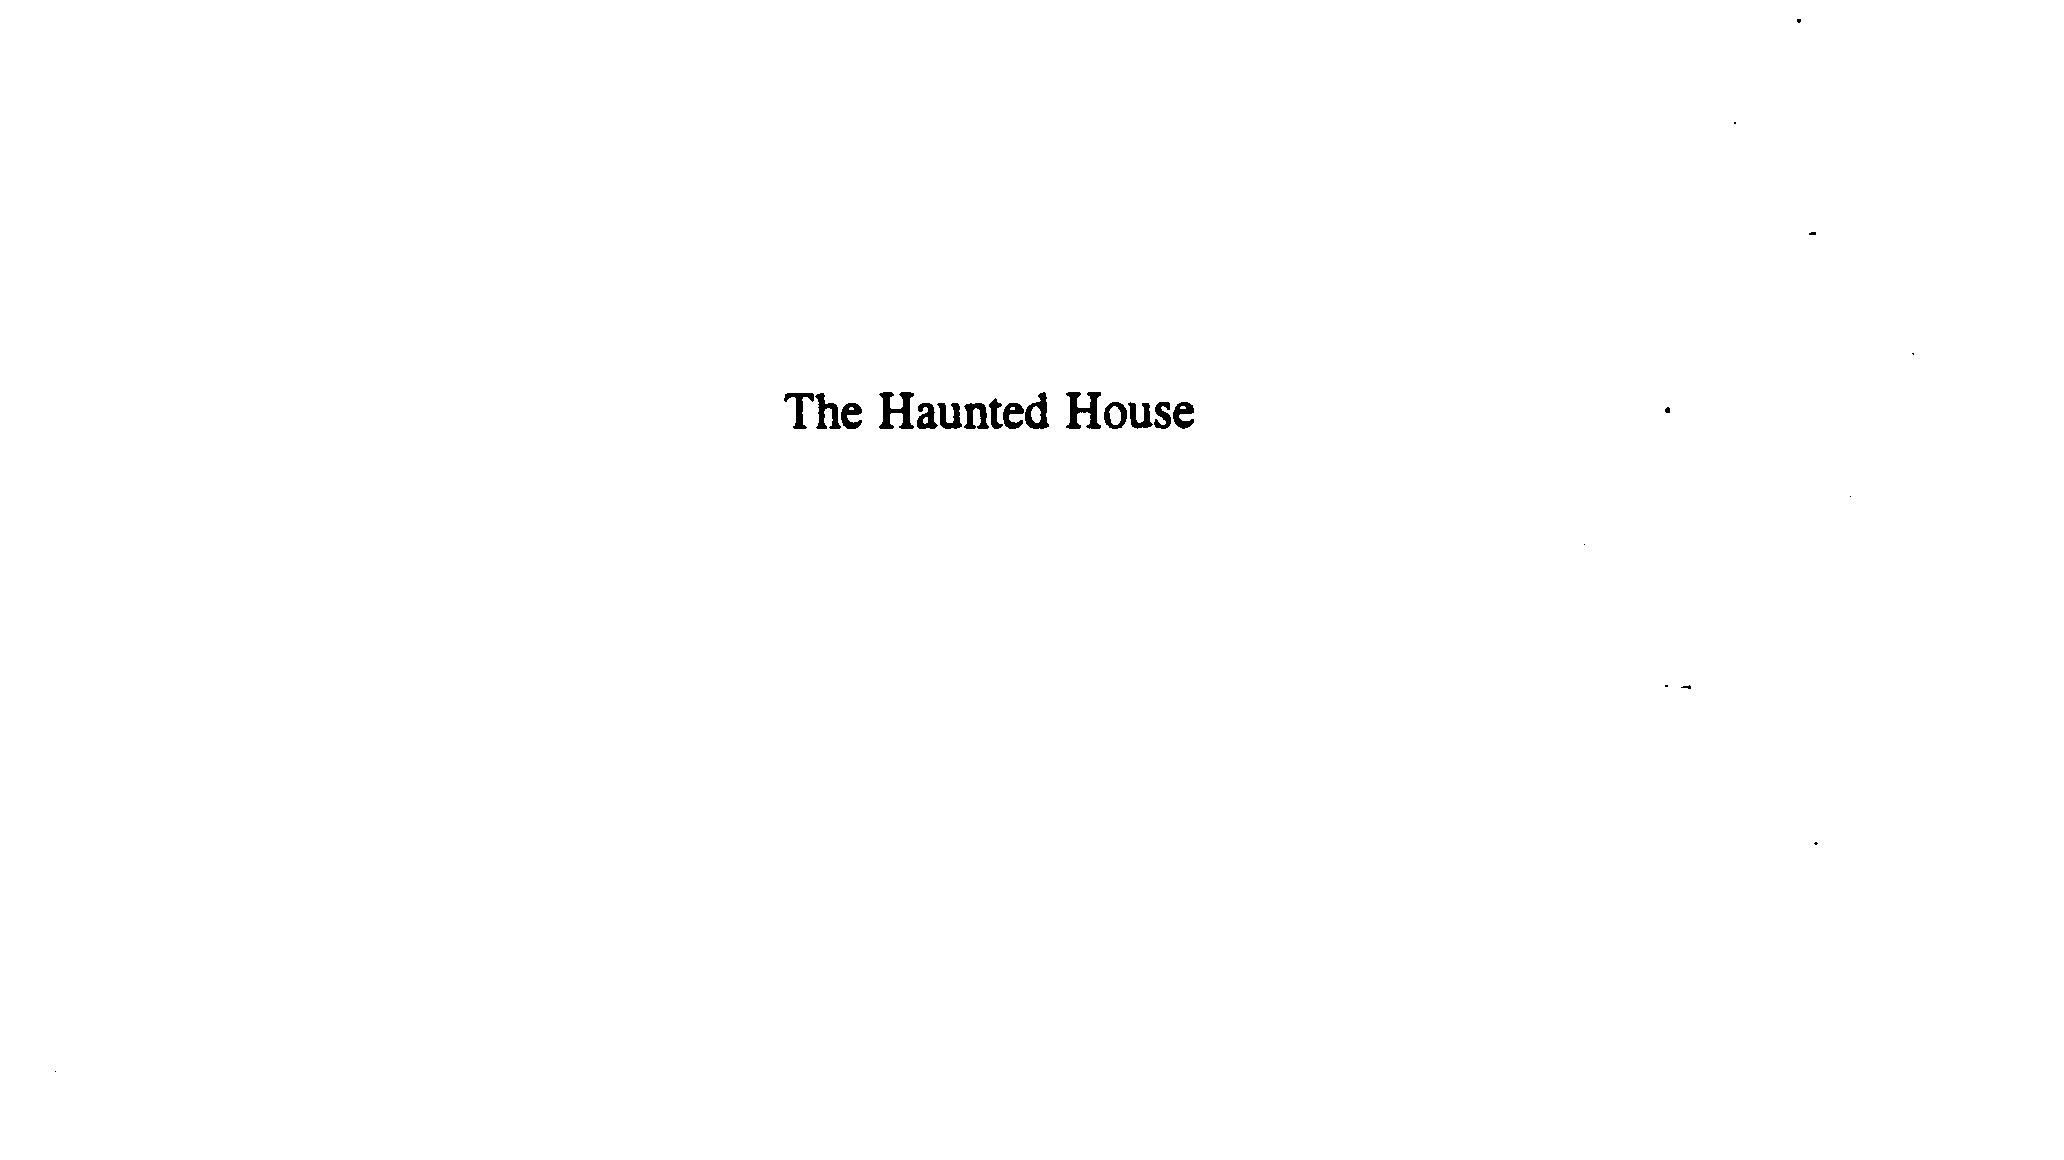  THE HAUNTED HOUSE